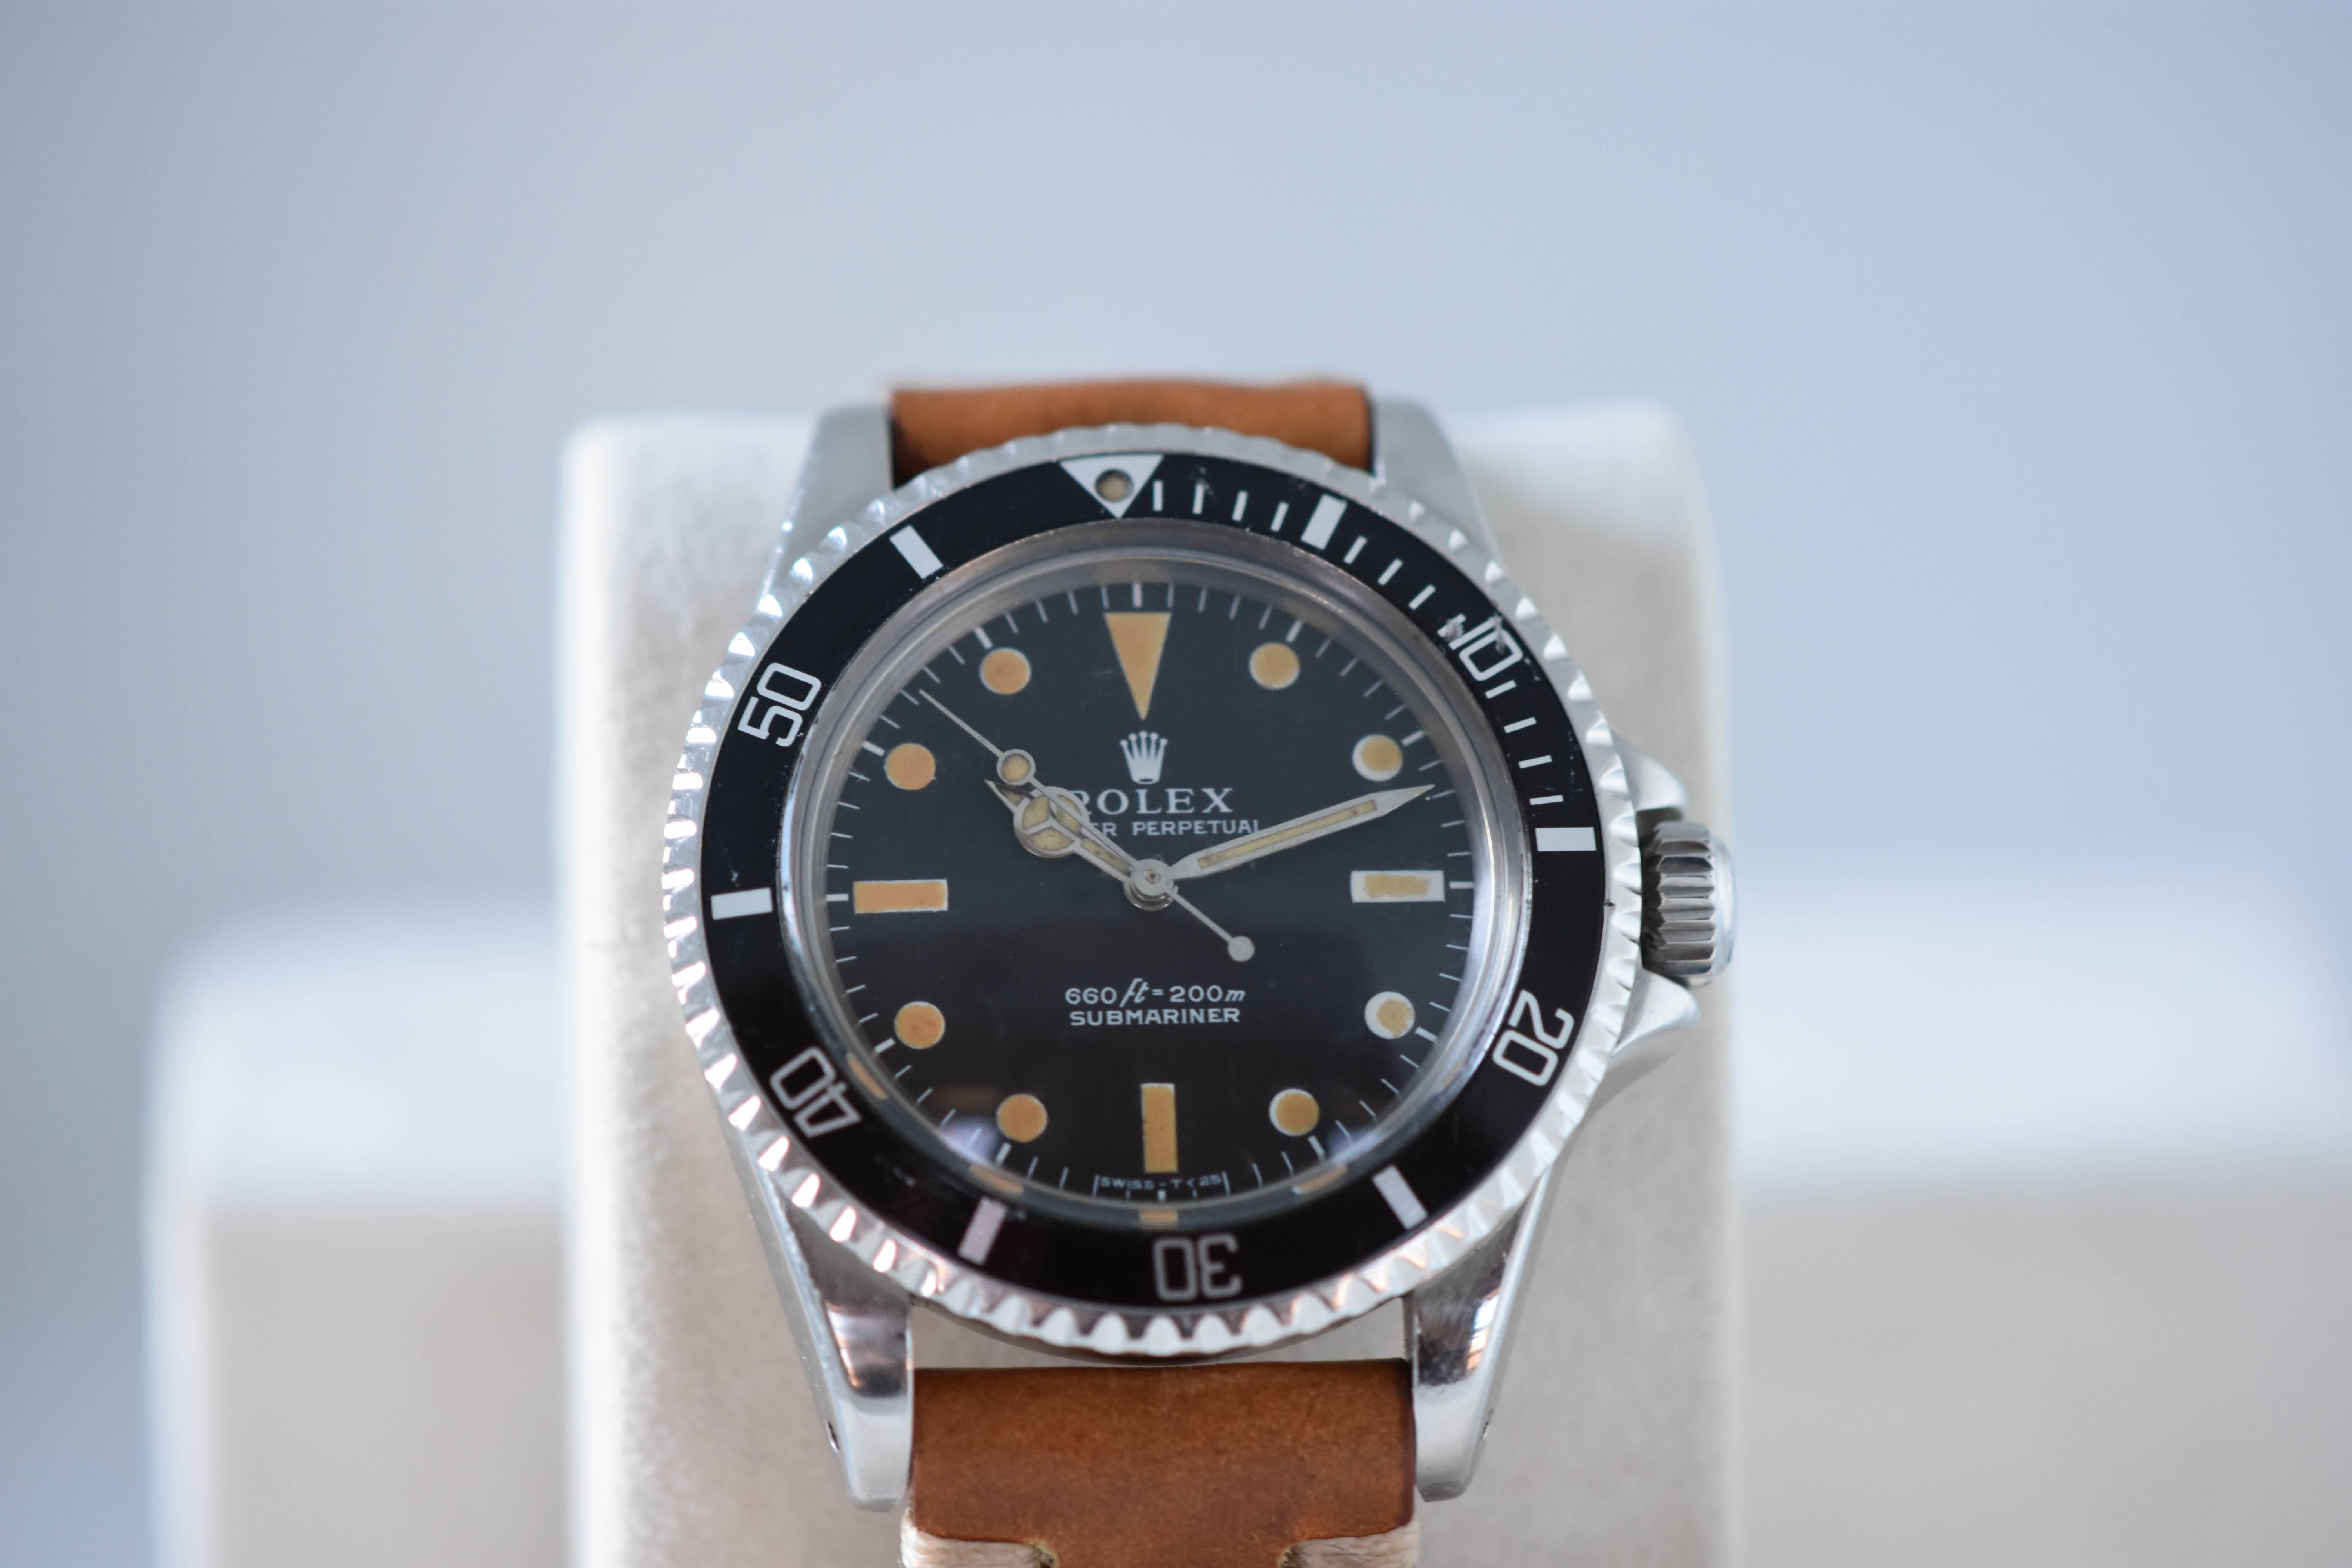 Reference: 5513

Circa: 1978

Movement: Cal. 1530

Serial number: 5224xxx

Case: 40mm, stainless steel with screw-down case back and crown; winding crown engraved with Rolex coronet logo; pointed crown guard; rotating bezel

Dial: Matte